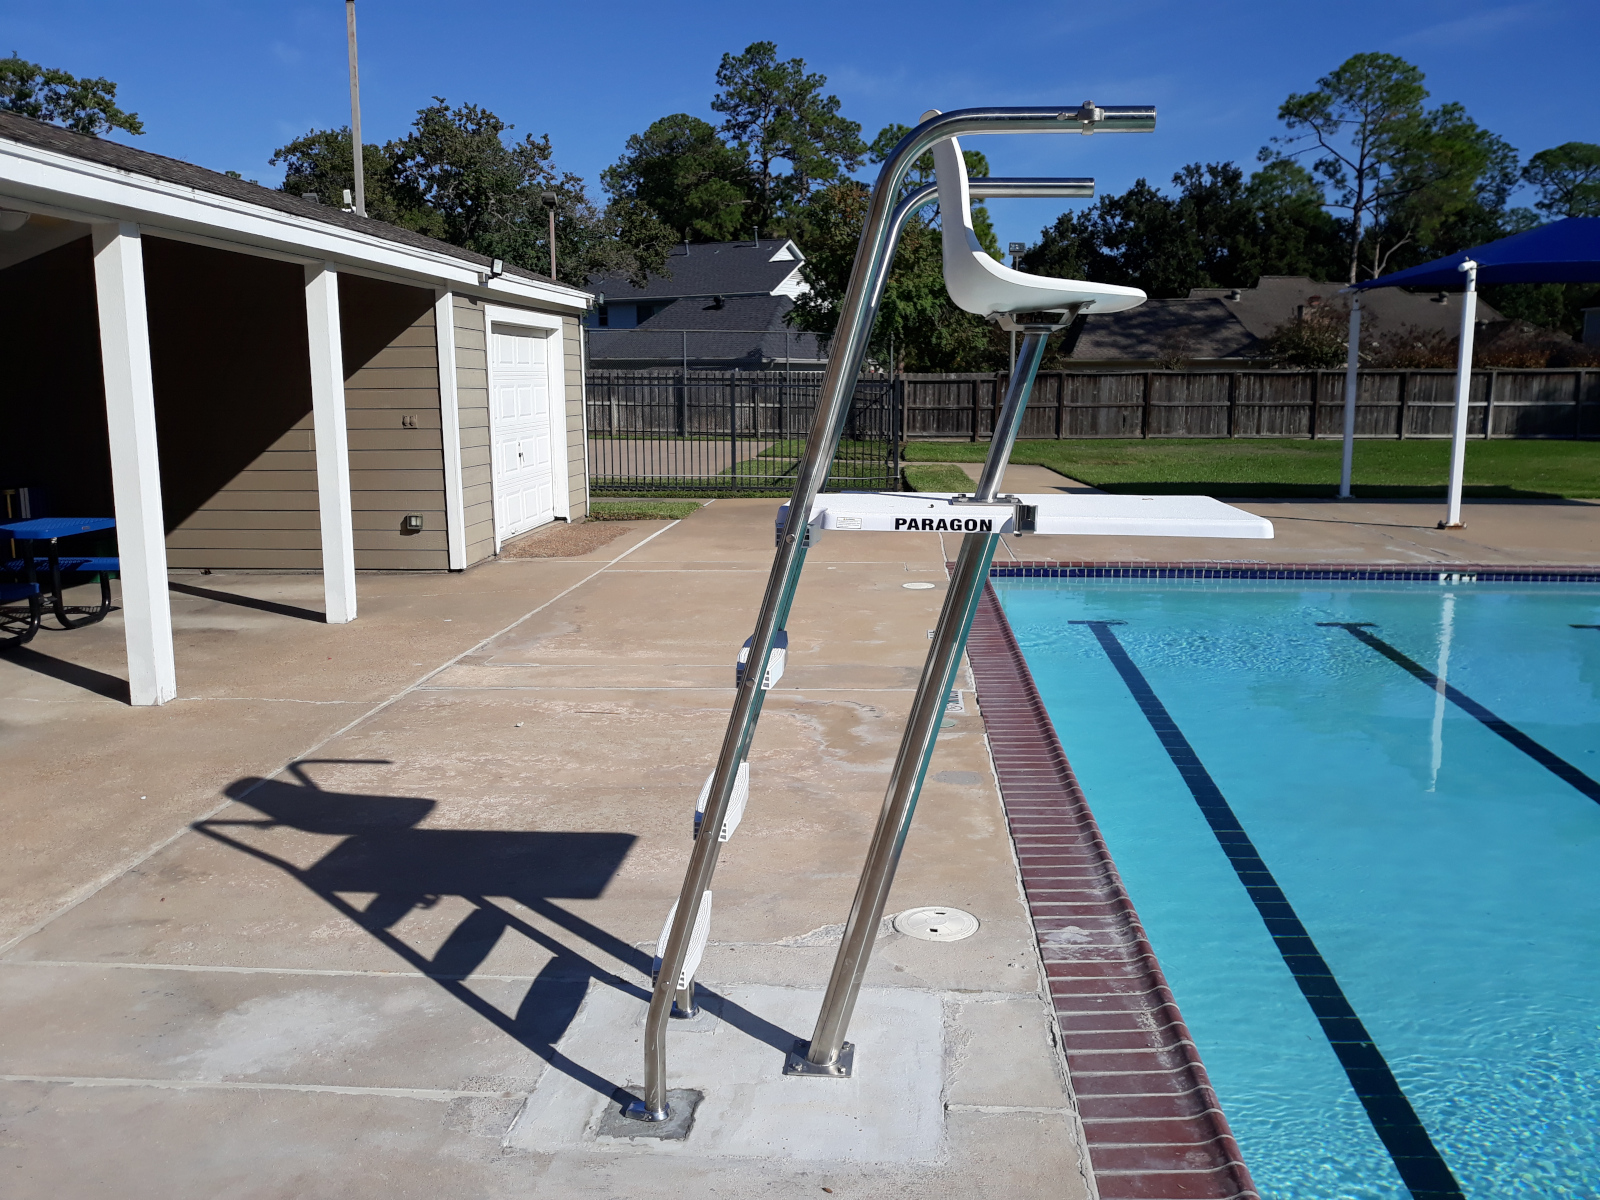 Williamsburg Settlement Lifeguard Stands Replaced